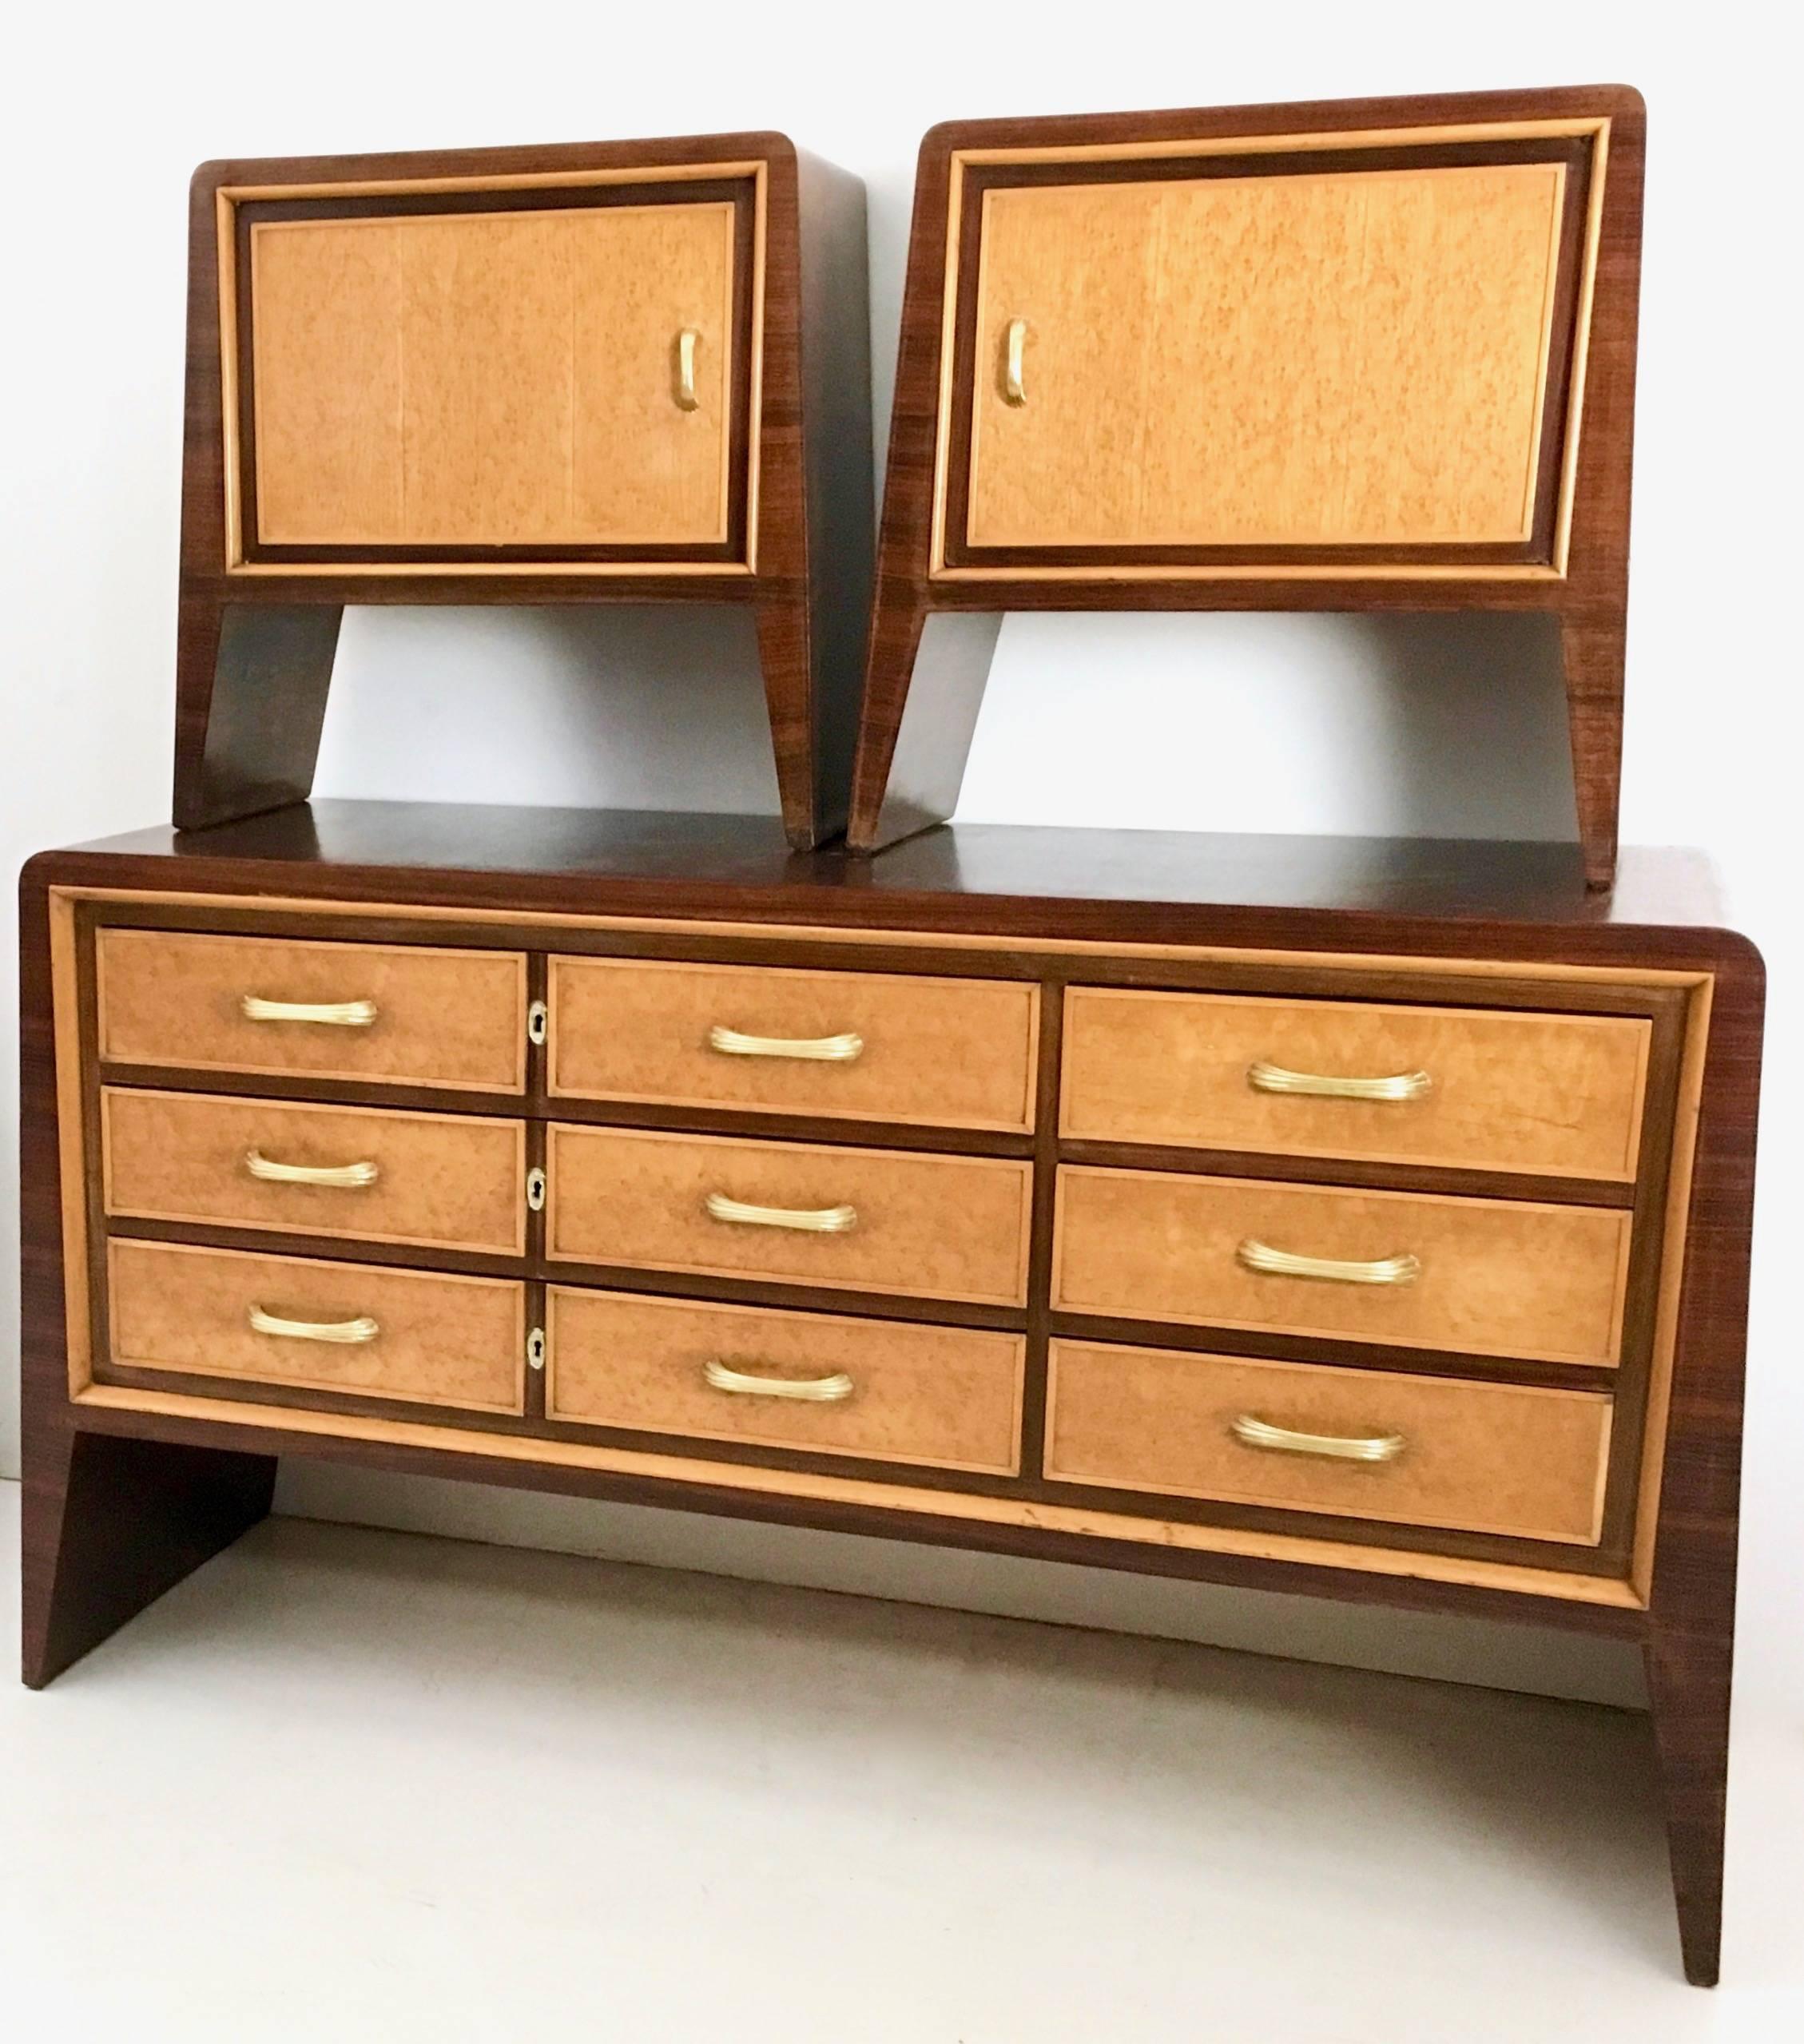 These rare nightstands are made in mahogany veneer and maple.
They feature brass handles. 
In good / fair condition with their original patina. 

Related pieces are illustrated by Luca Scacchetti, Guglielmo Ulrich, Milan, 2009, pls. 342, 350, 361,